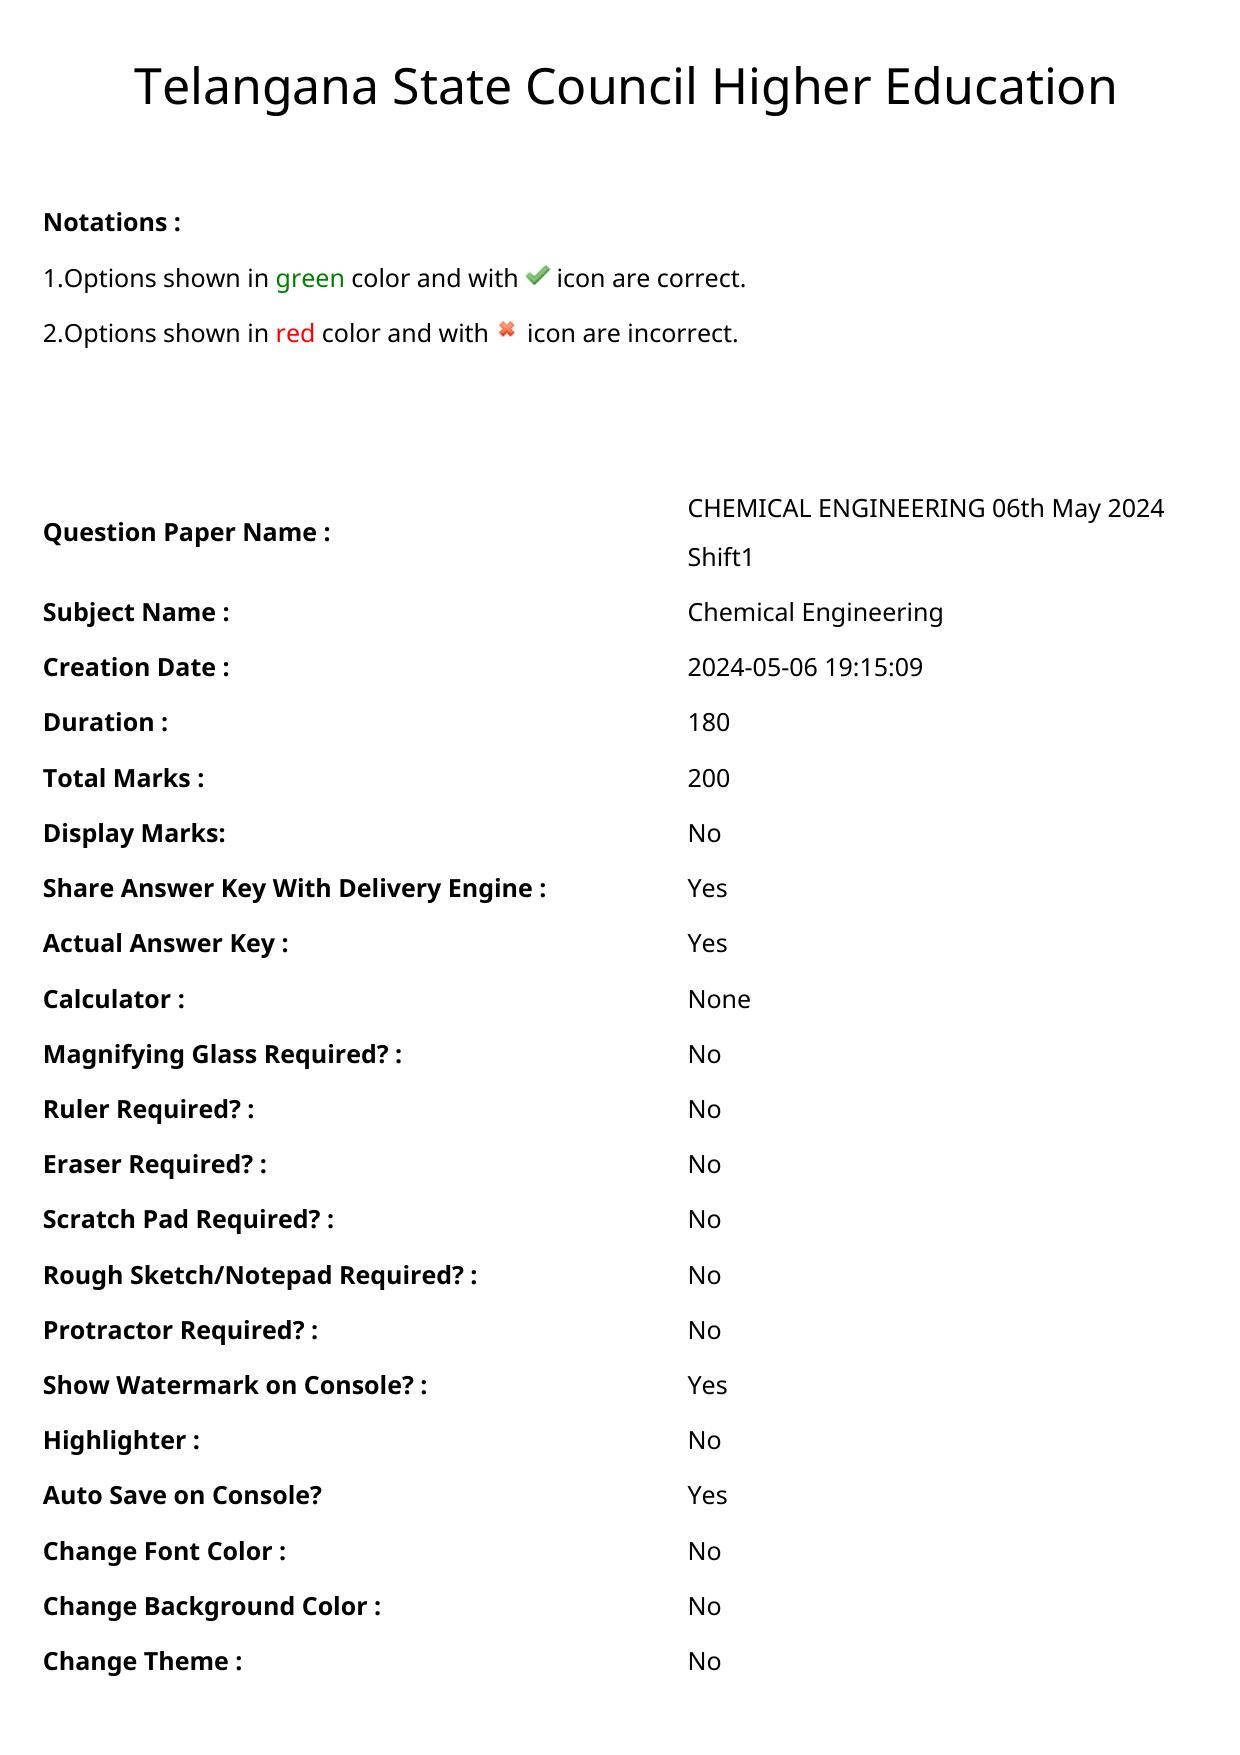 TS ECET 2024: CHE – CHEMICAL ENGINEERING Master Question Paper With Preliminary Key - Page 1